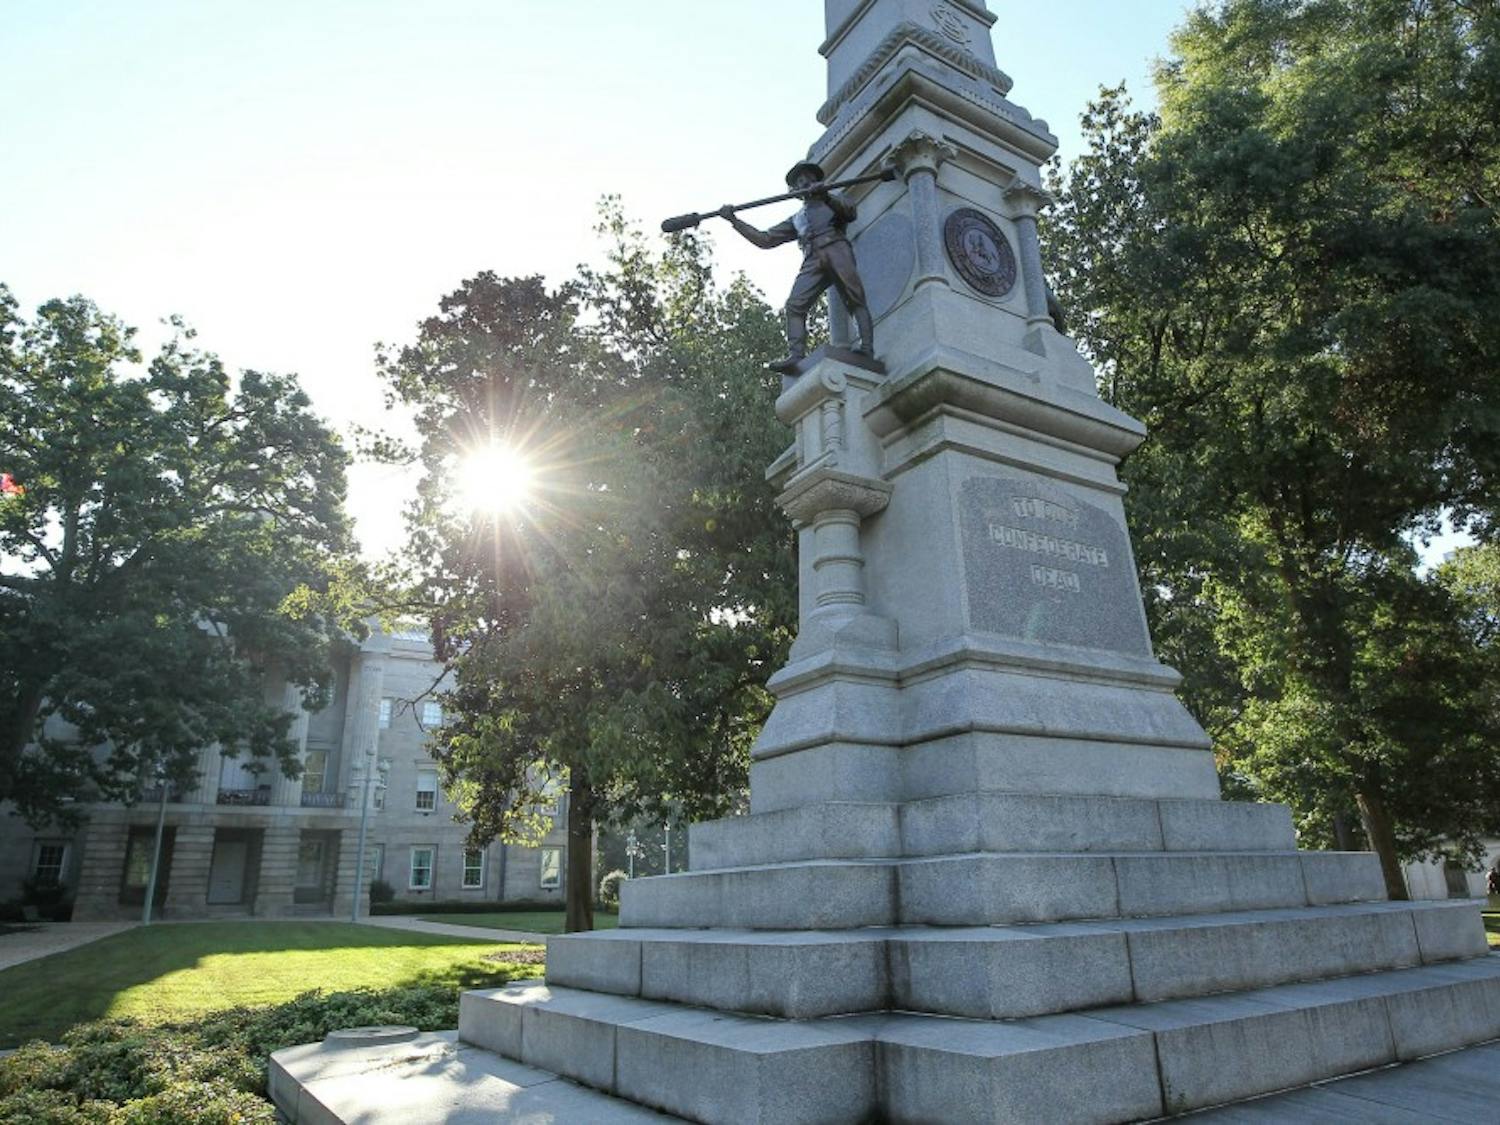 Three Confederate statues on North Carolina's old Capitol Grounds in Raleigh, NC are under consideration for relocation.